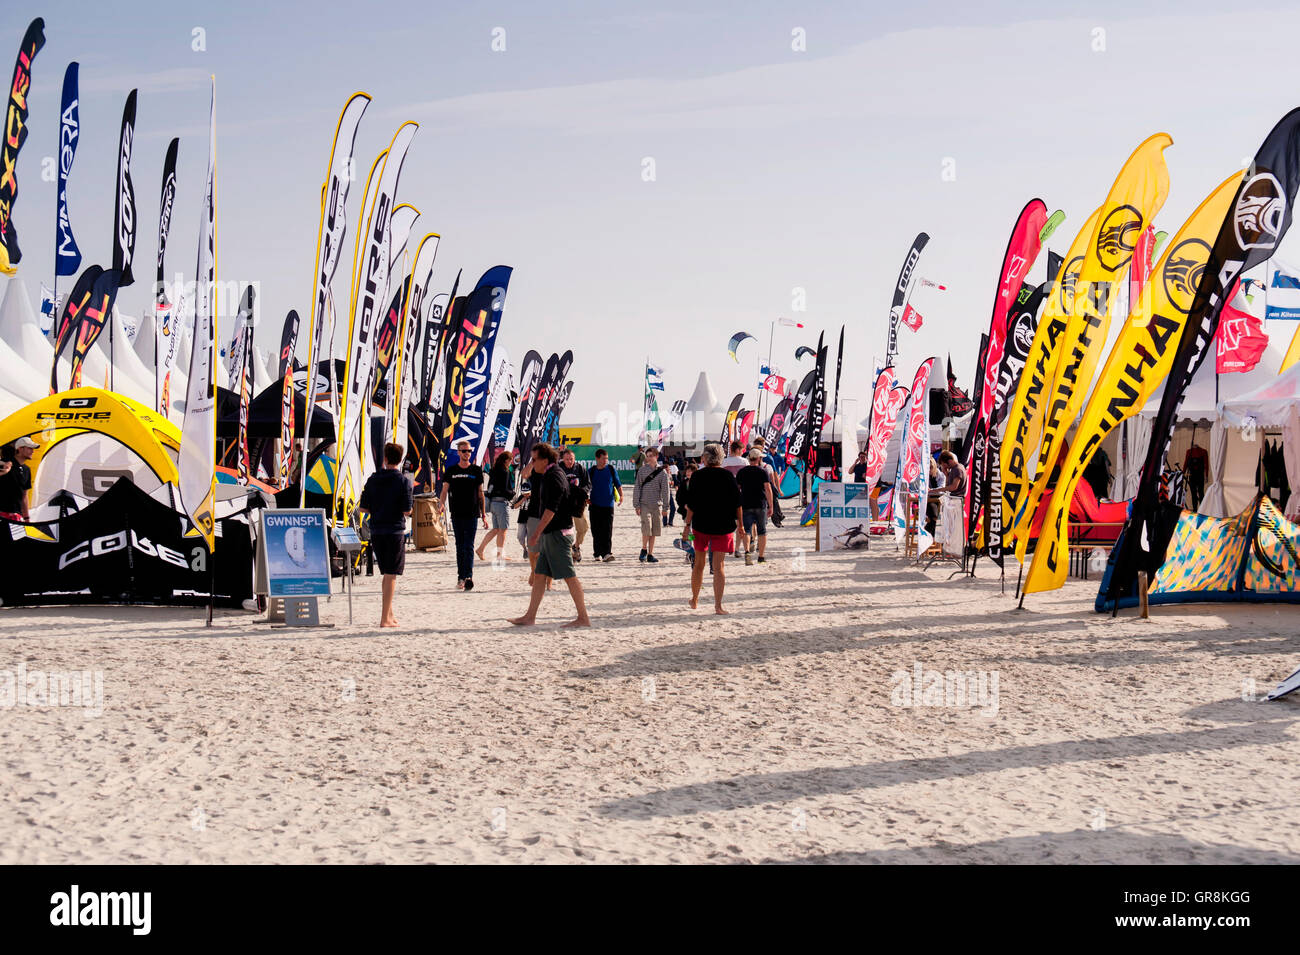 Impression Of The Kitesurf World Cup In St. Peter-Ording, Germany, August 21-30 2015 Stock Photo